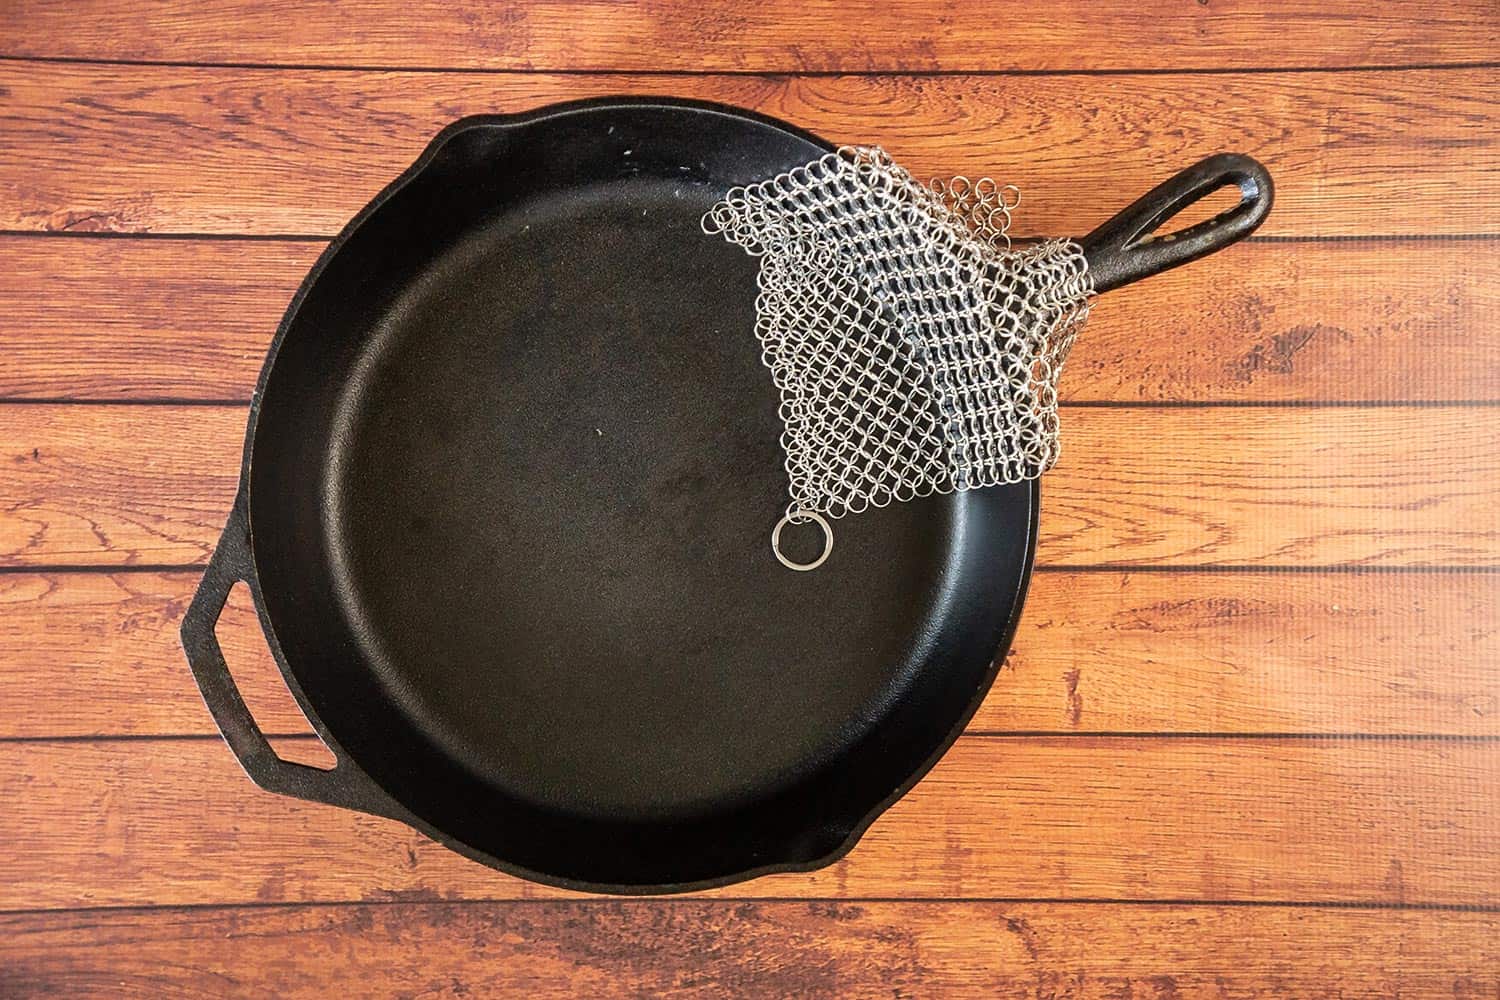 Cast iron cookware with small ring chainmail scrubber